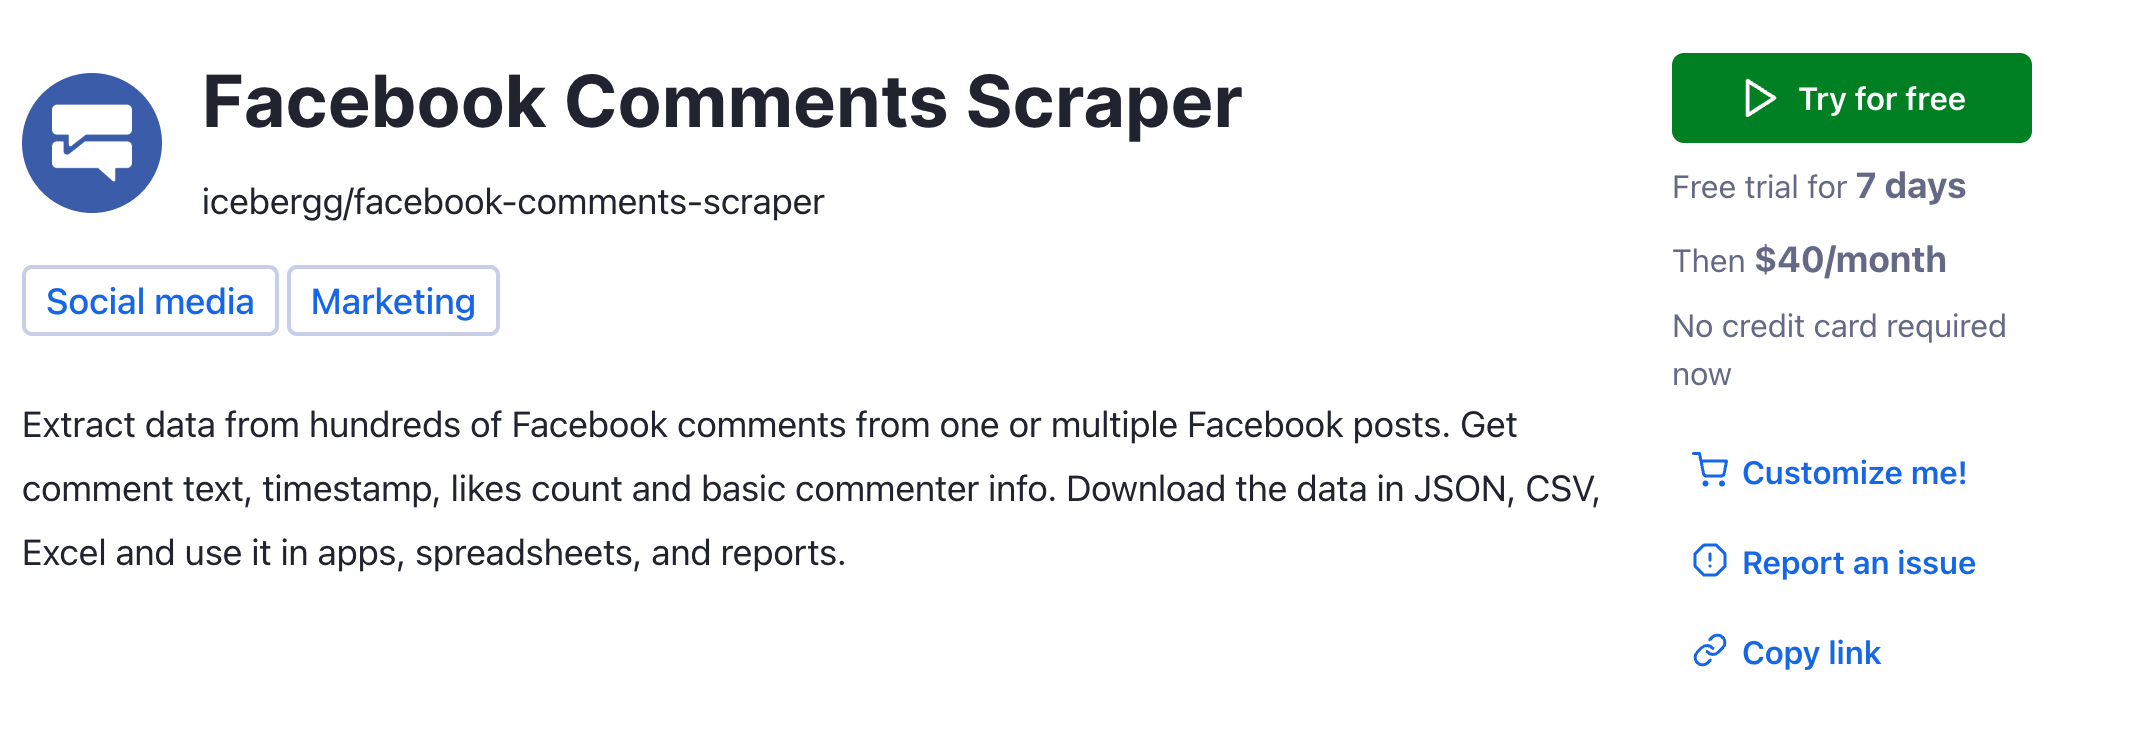 Step 1. Go to Facebook Comments Scraper